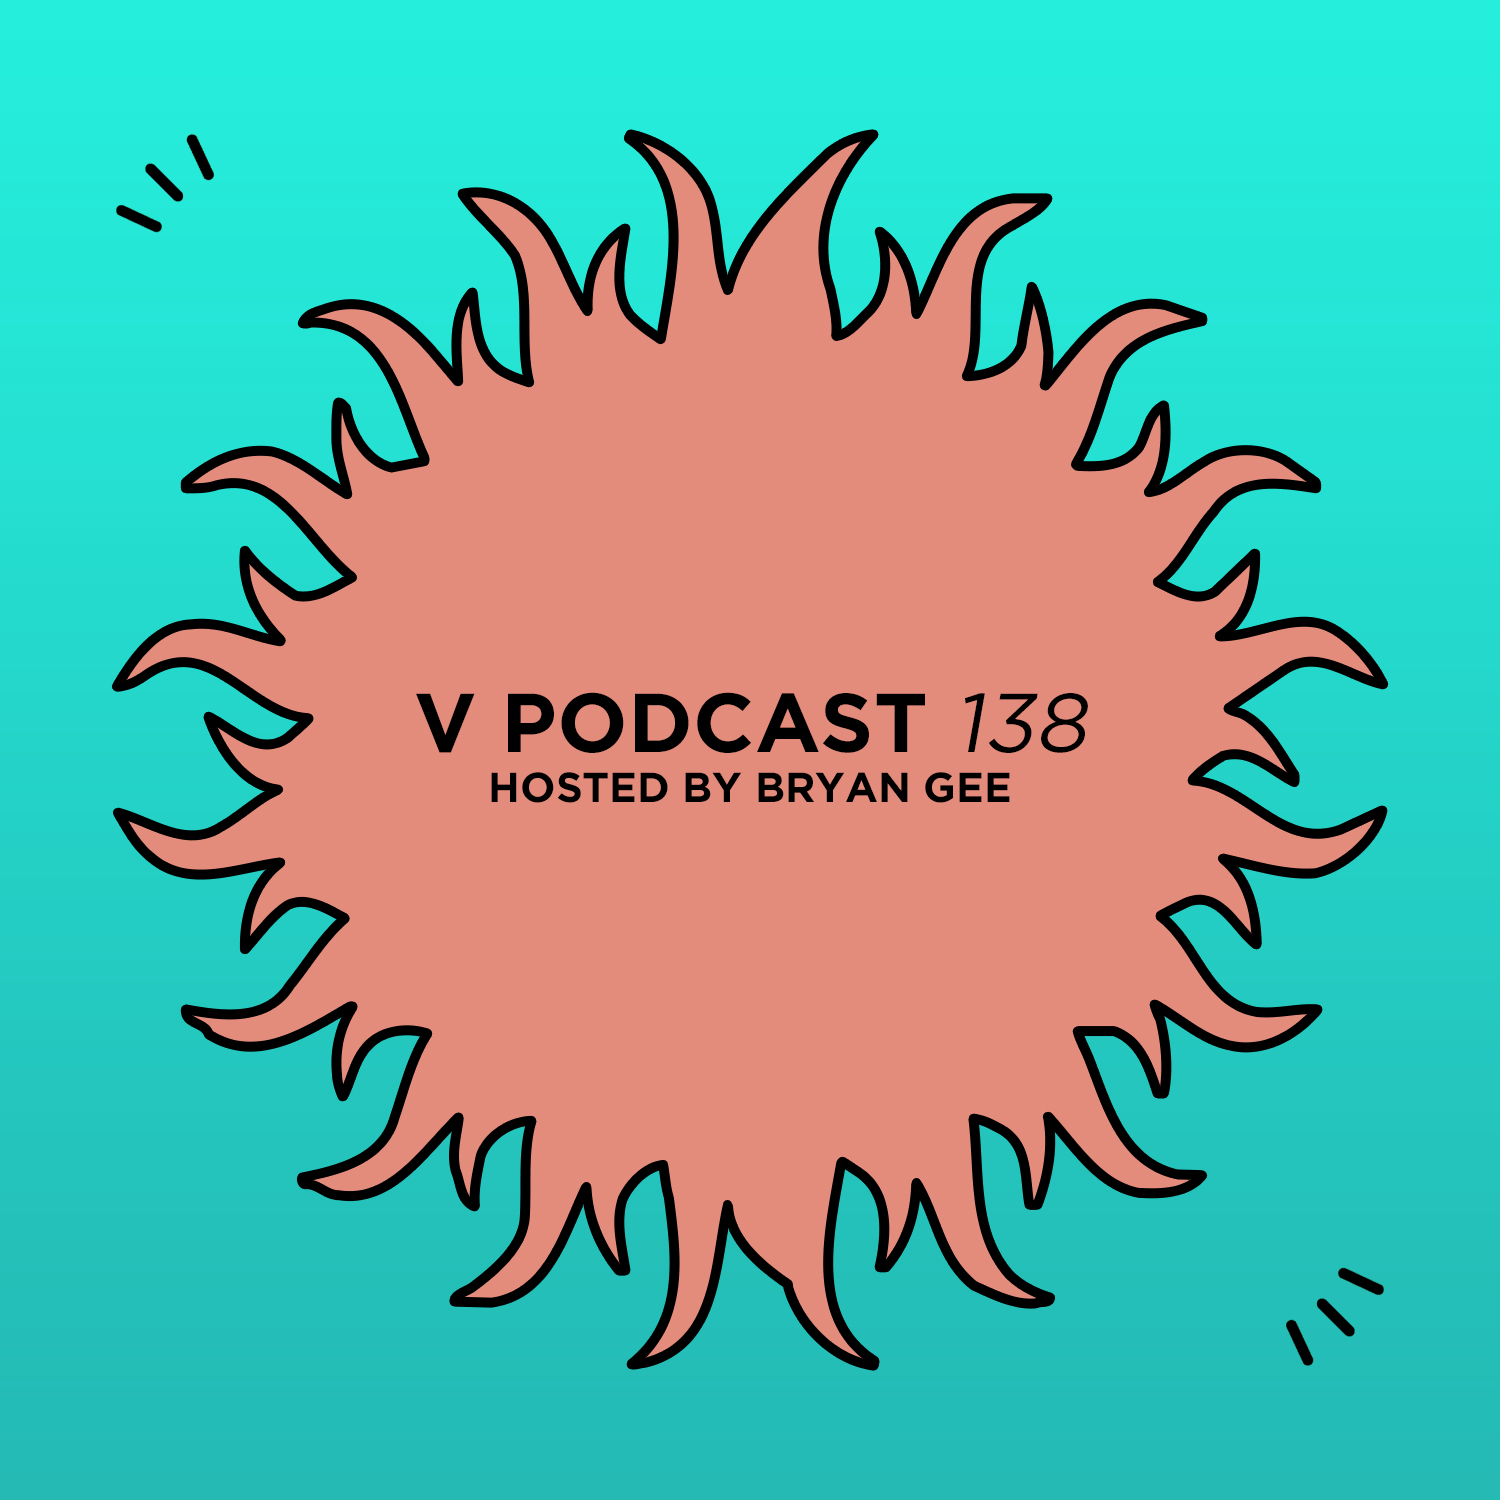 V Podcast 138 - Hosted by Bryan Gee Artwork